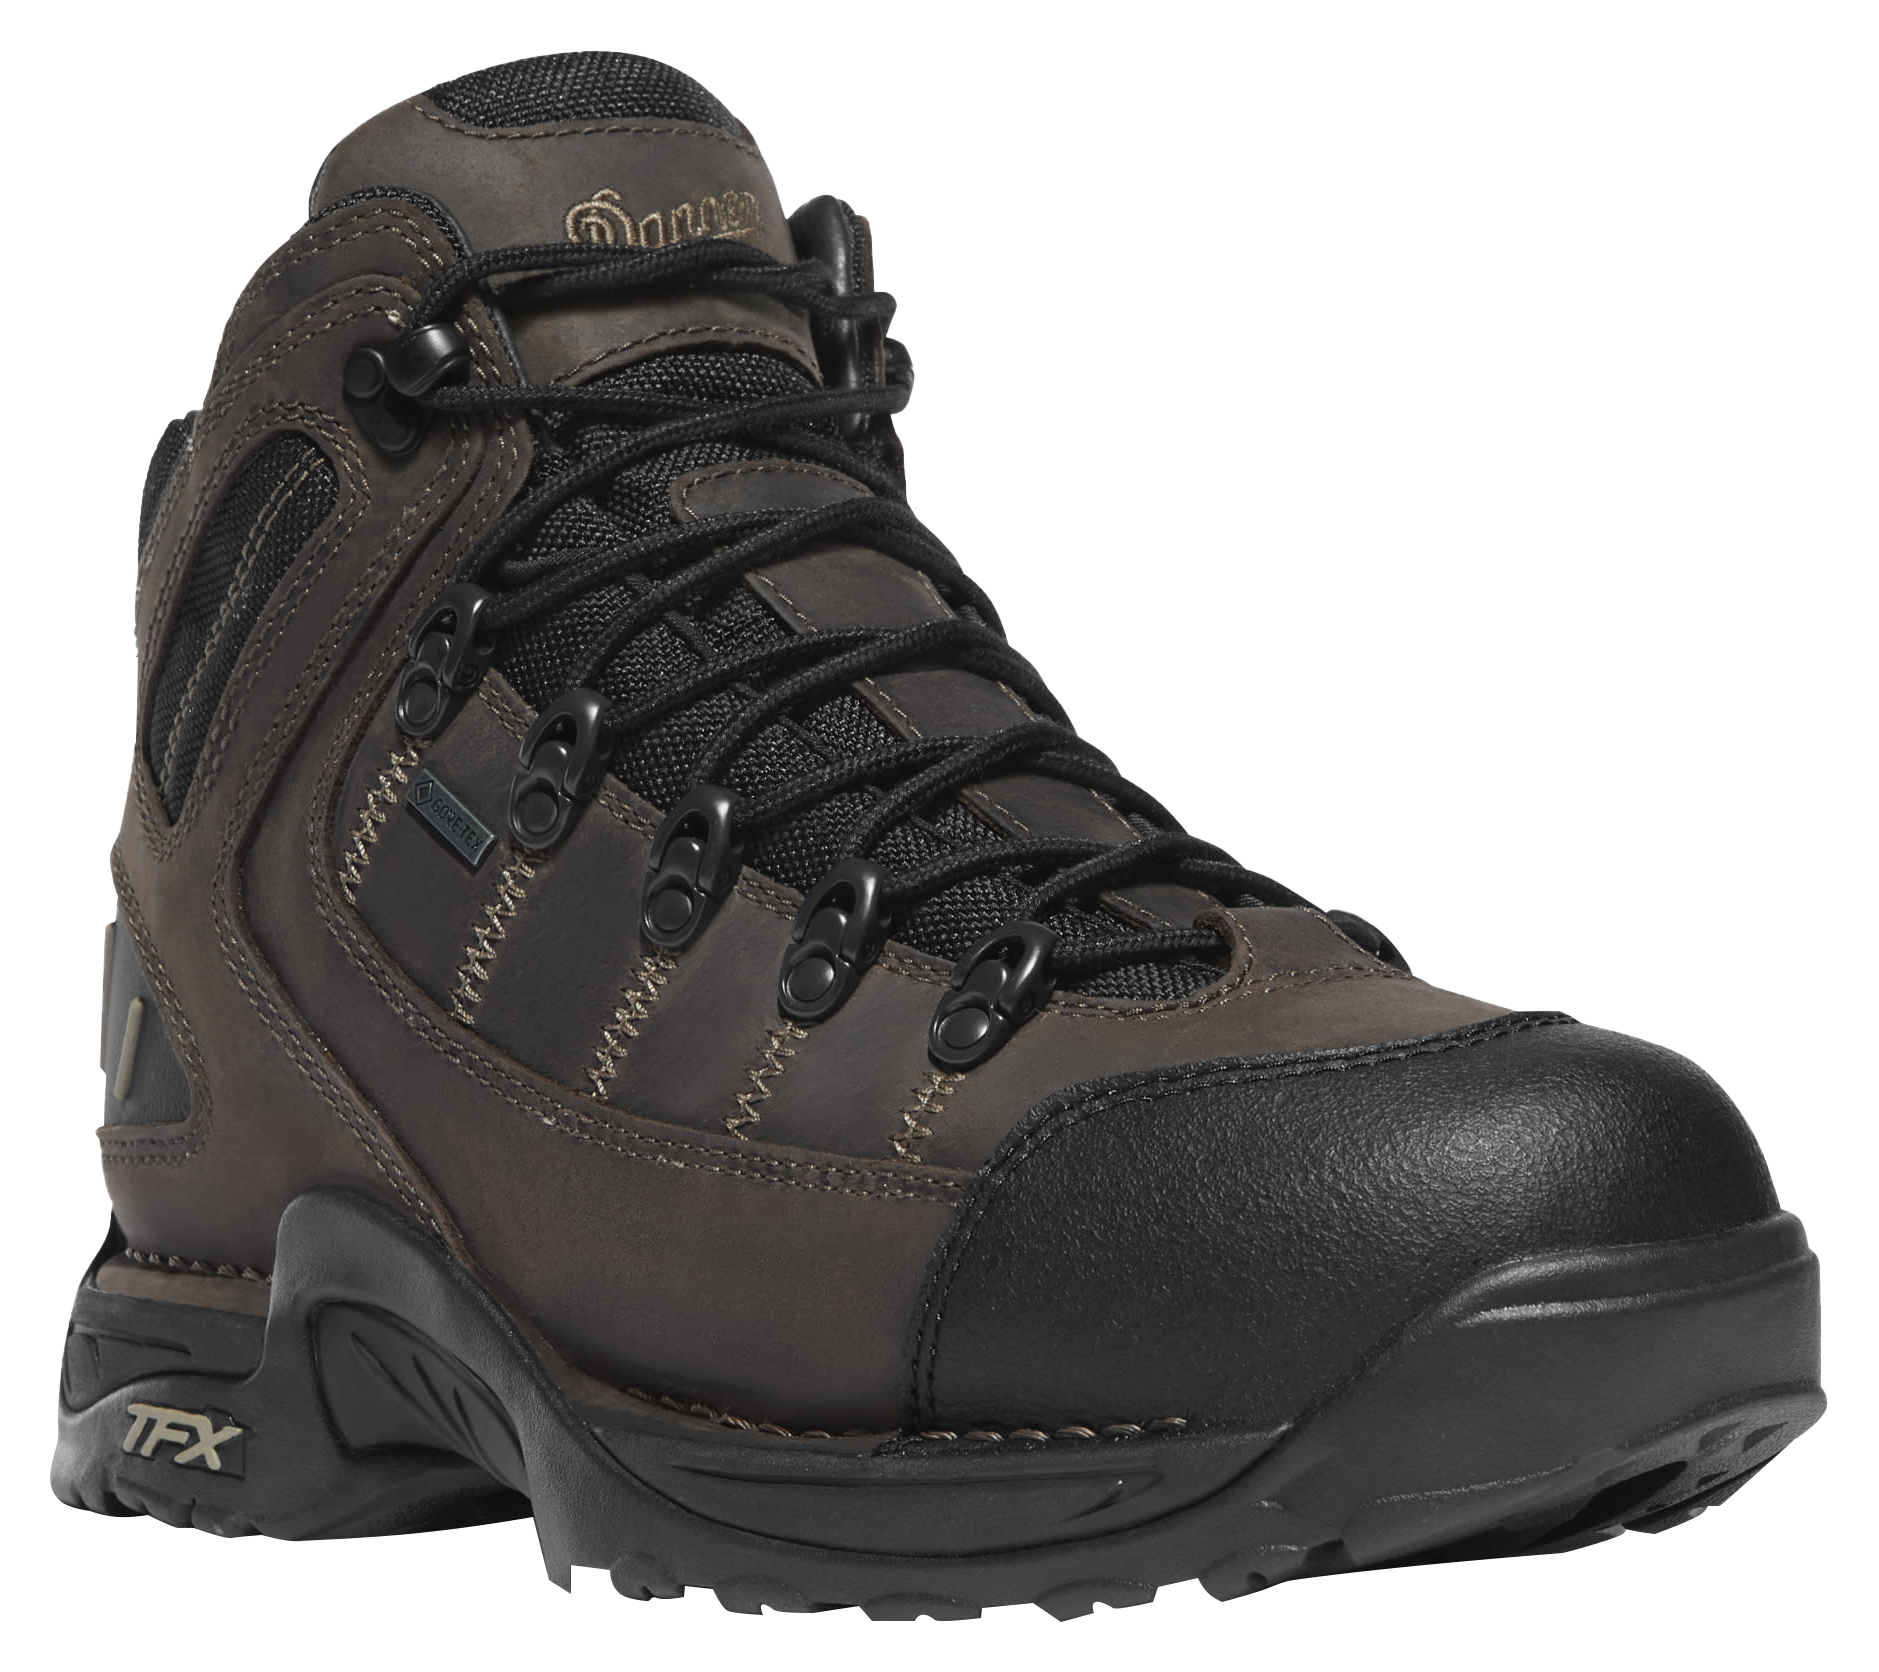 Danner 453 GORE-TEX Waterproof Hiking Boots for Men - Loam Brown/Chocolate Chip - 11W